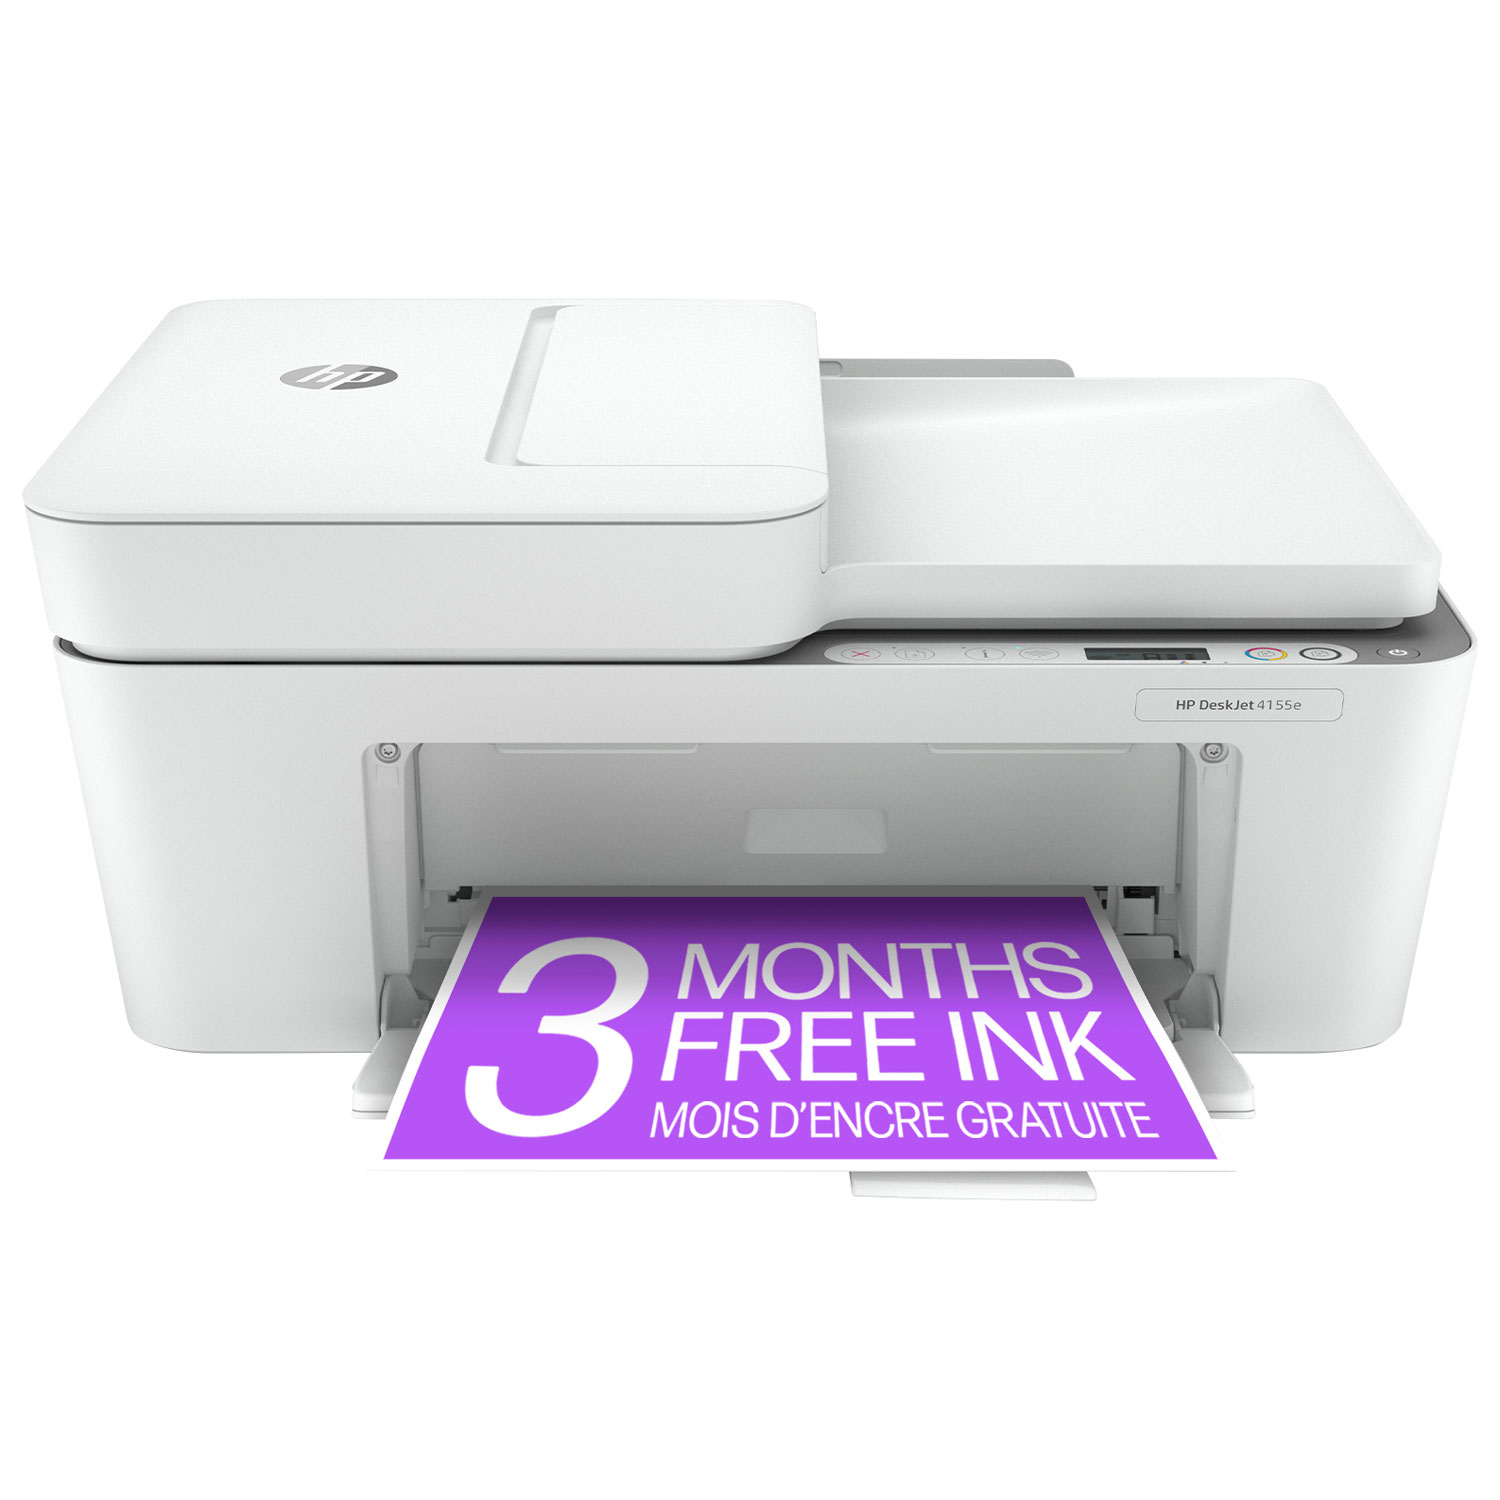 HP DeskJet 4155e Wireless All-In-One Inkjet Printer - HP Instant Ink 6-Month Free Trial Included*